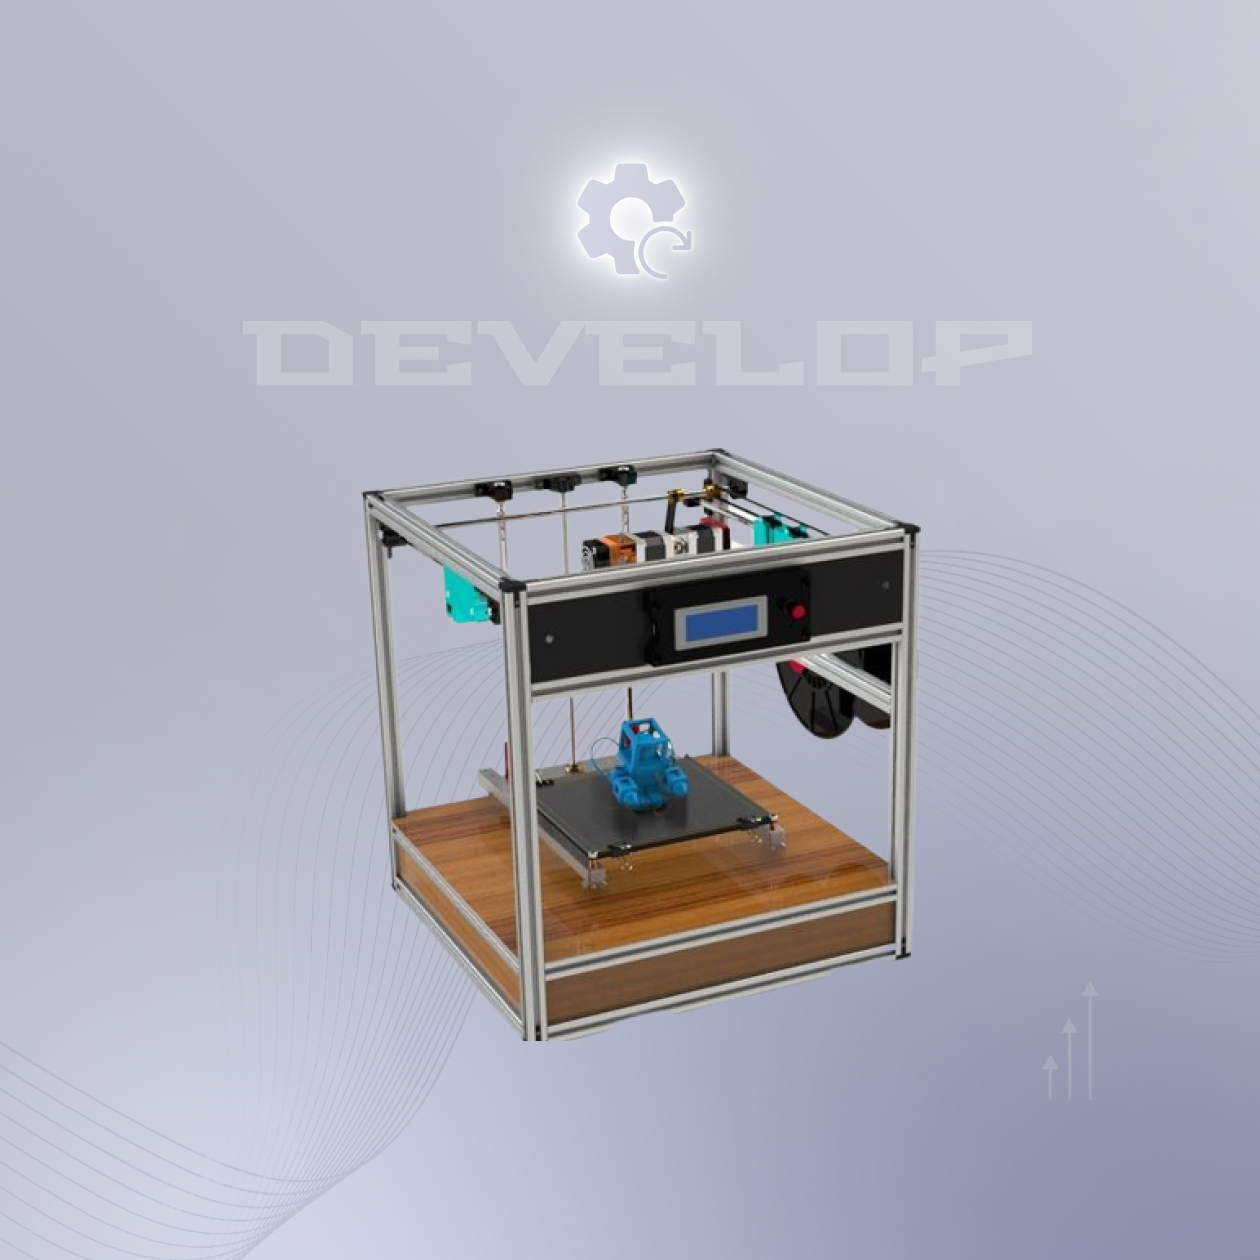 3D printing, mechanical engineering and electrical engineering helped our team to make the 3D printer.